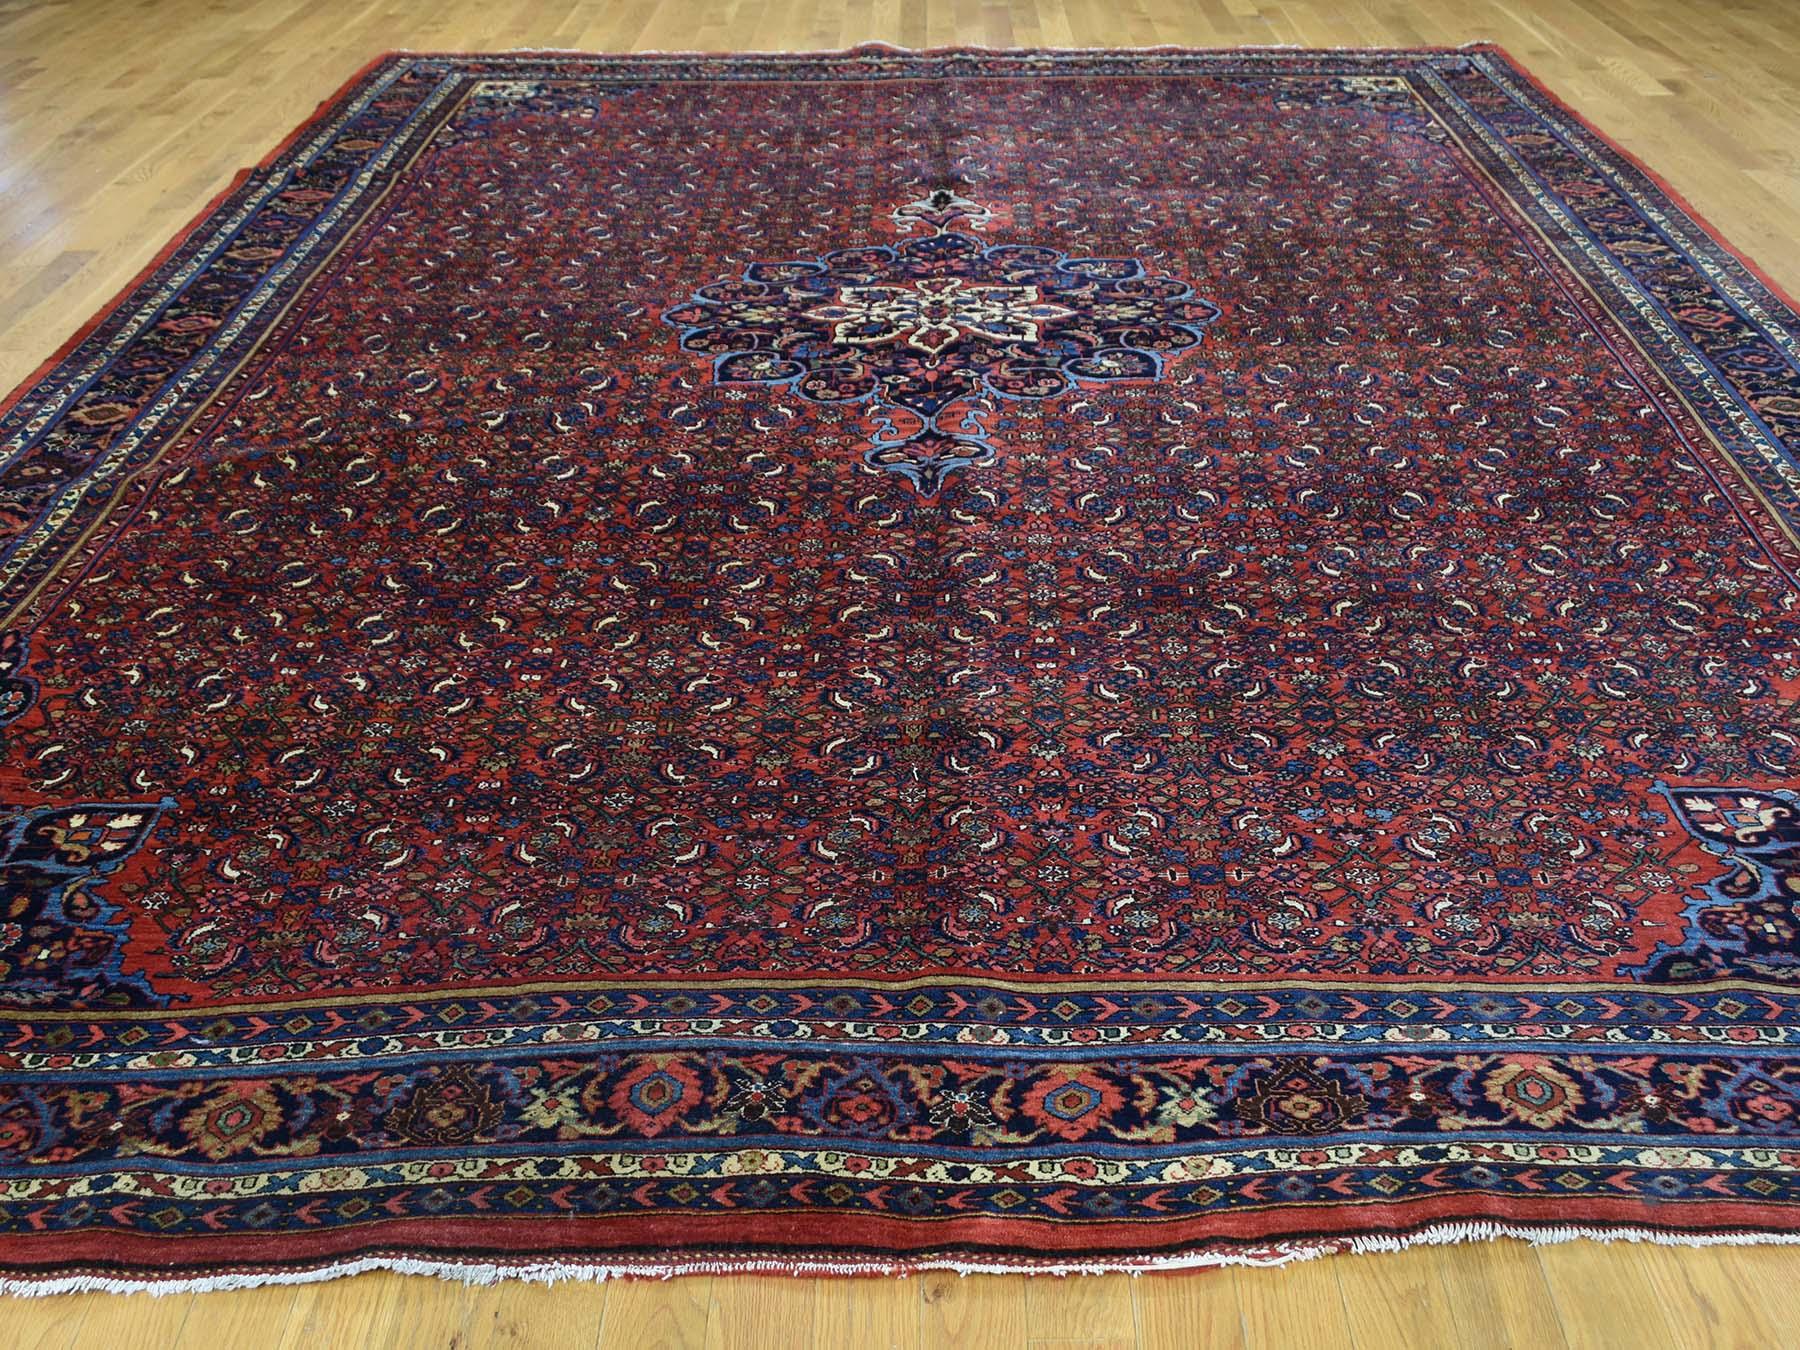 This is a genuine hand knotted oriental rug. It is not hand tufted or machine made rug. Our entire inventory is made of either hand knotted or handwoven rugs.

Decorate your home with this high quality antique carpet. This handcrafted Persian Bidjar